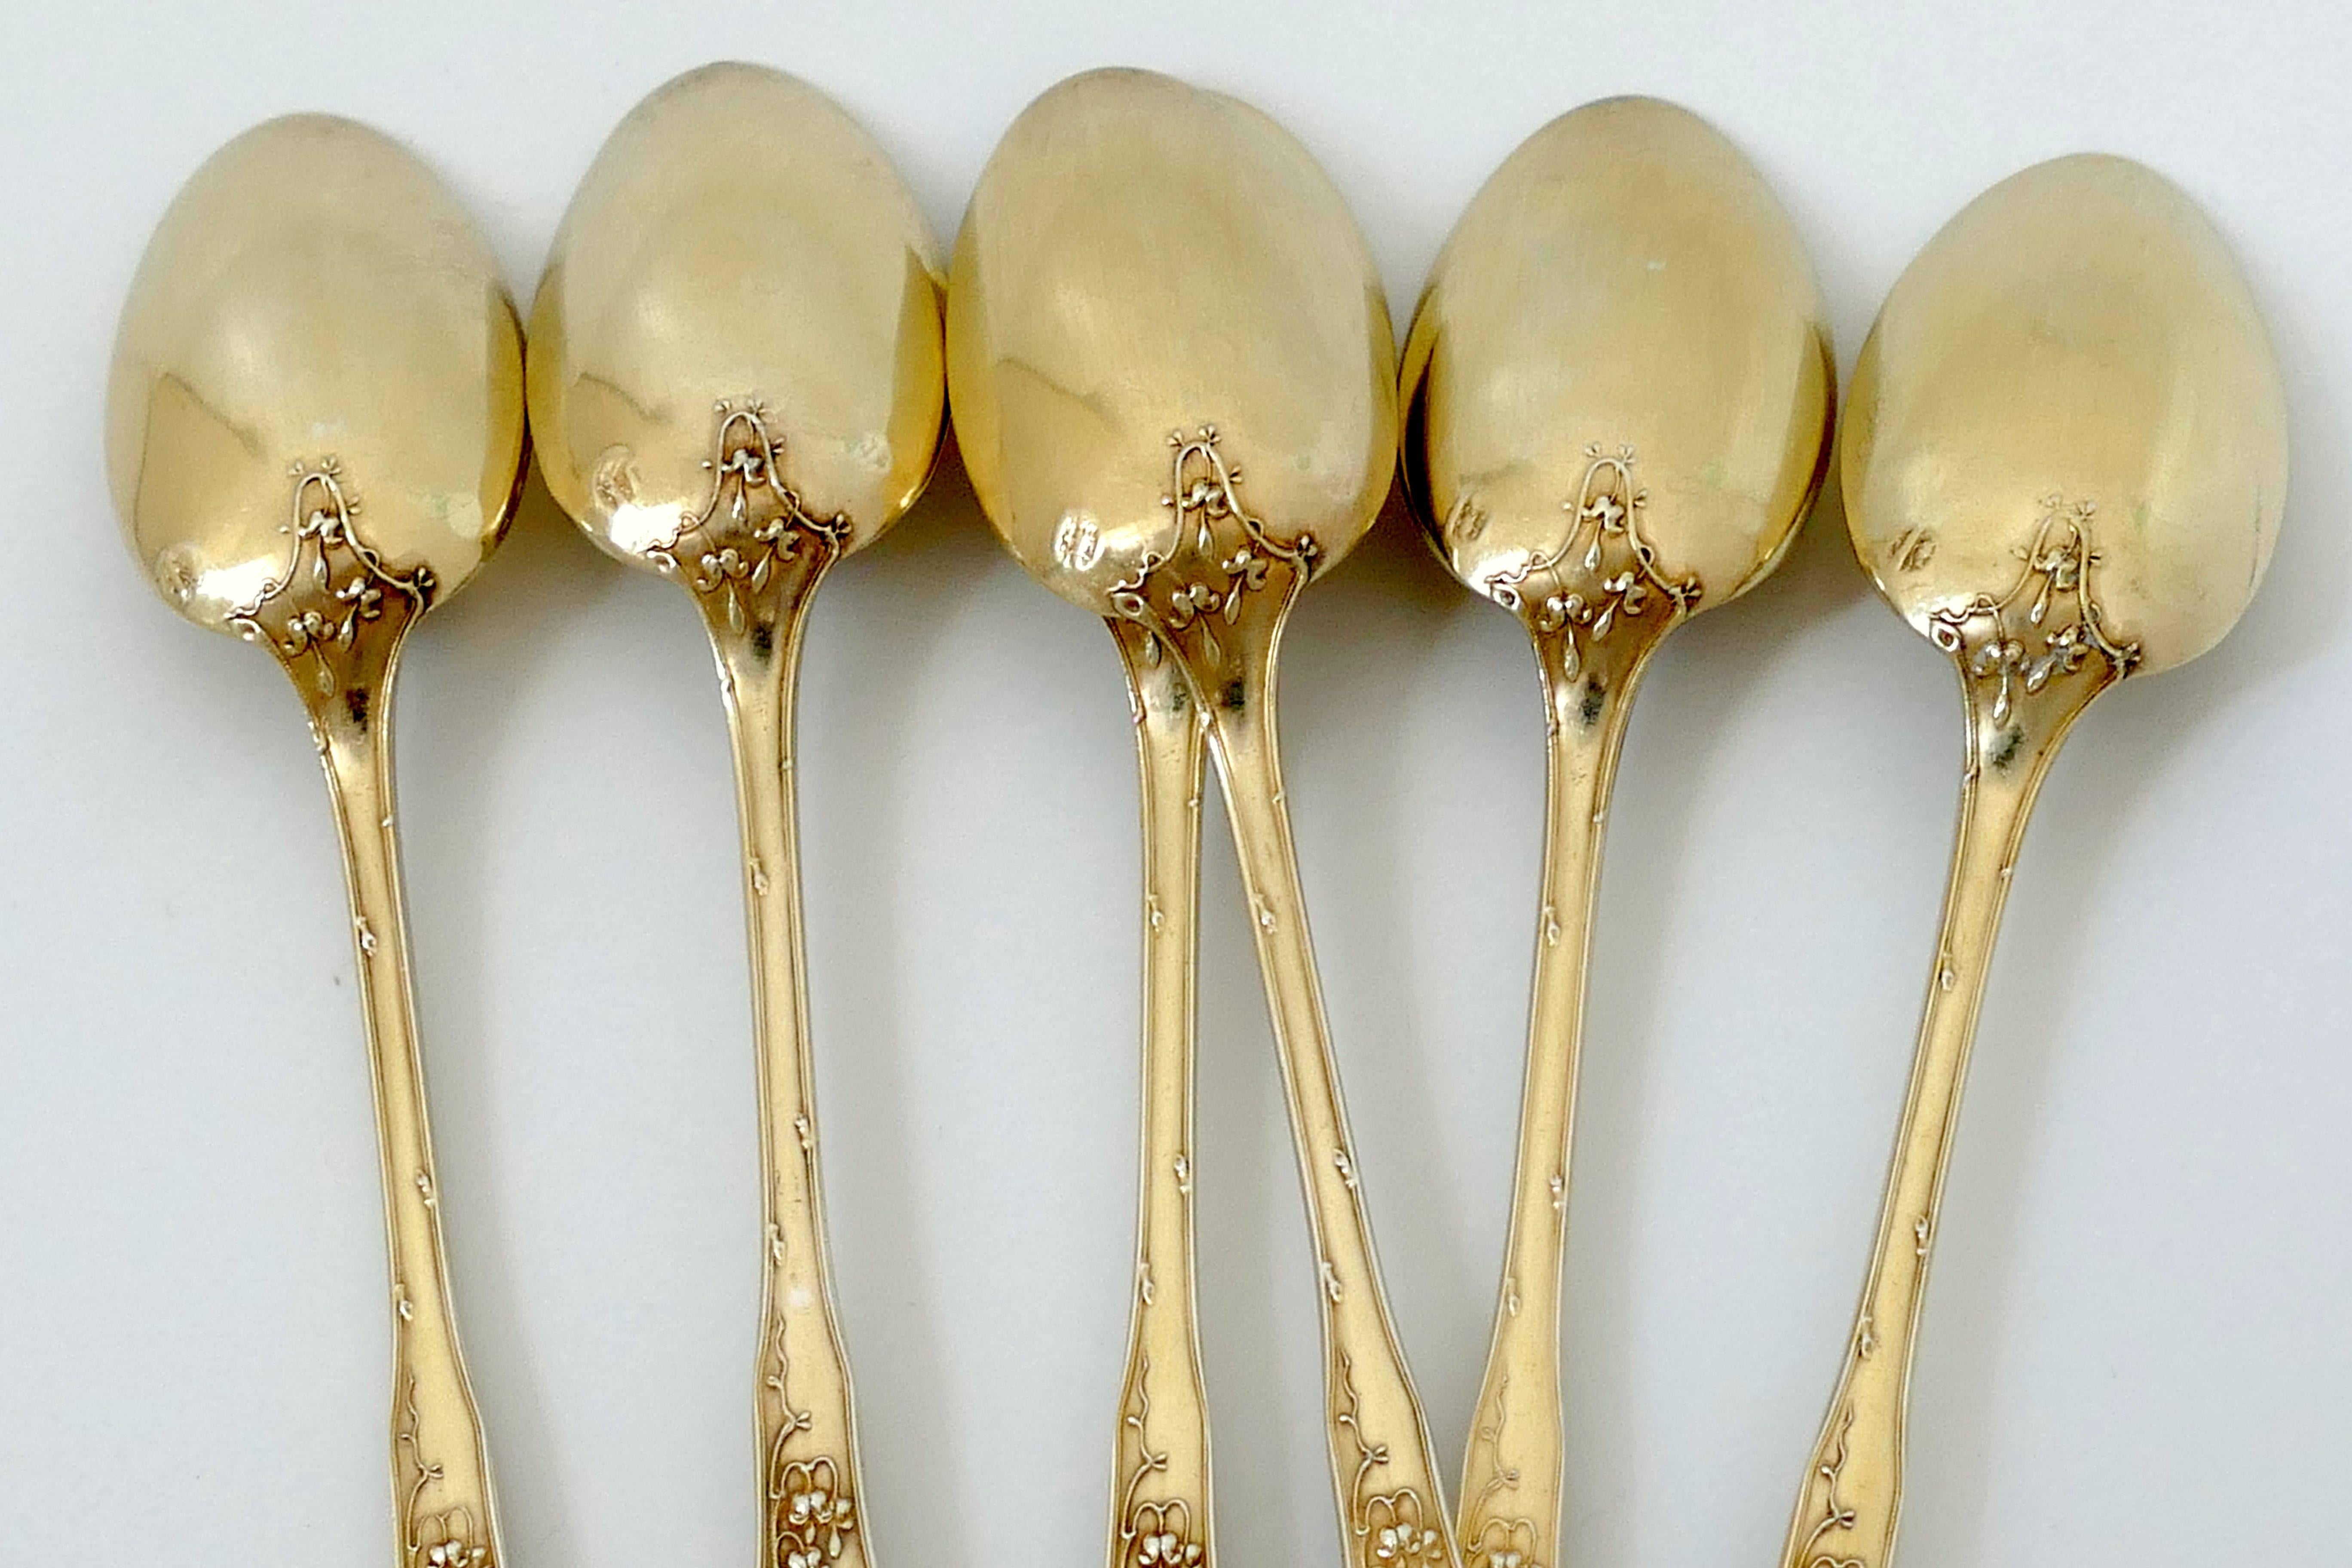 Late 19th Century Soufflot French Sterling Silver 18k Gold Tea Coffee Spoons Set 6 Pc, Thrush, Box